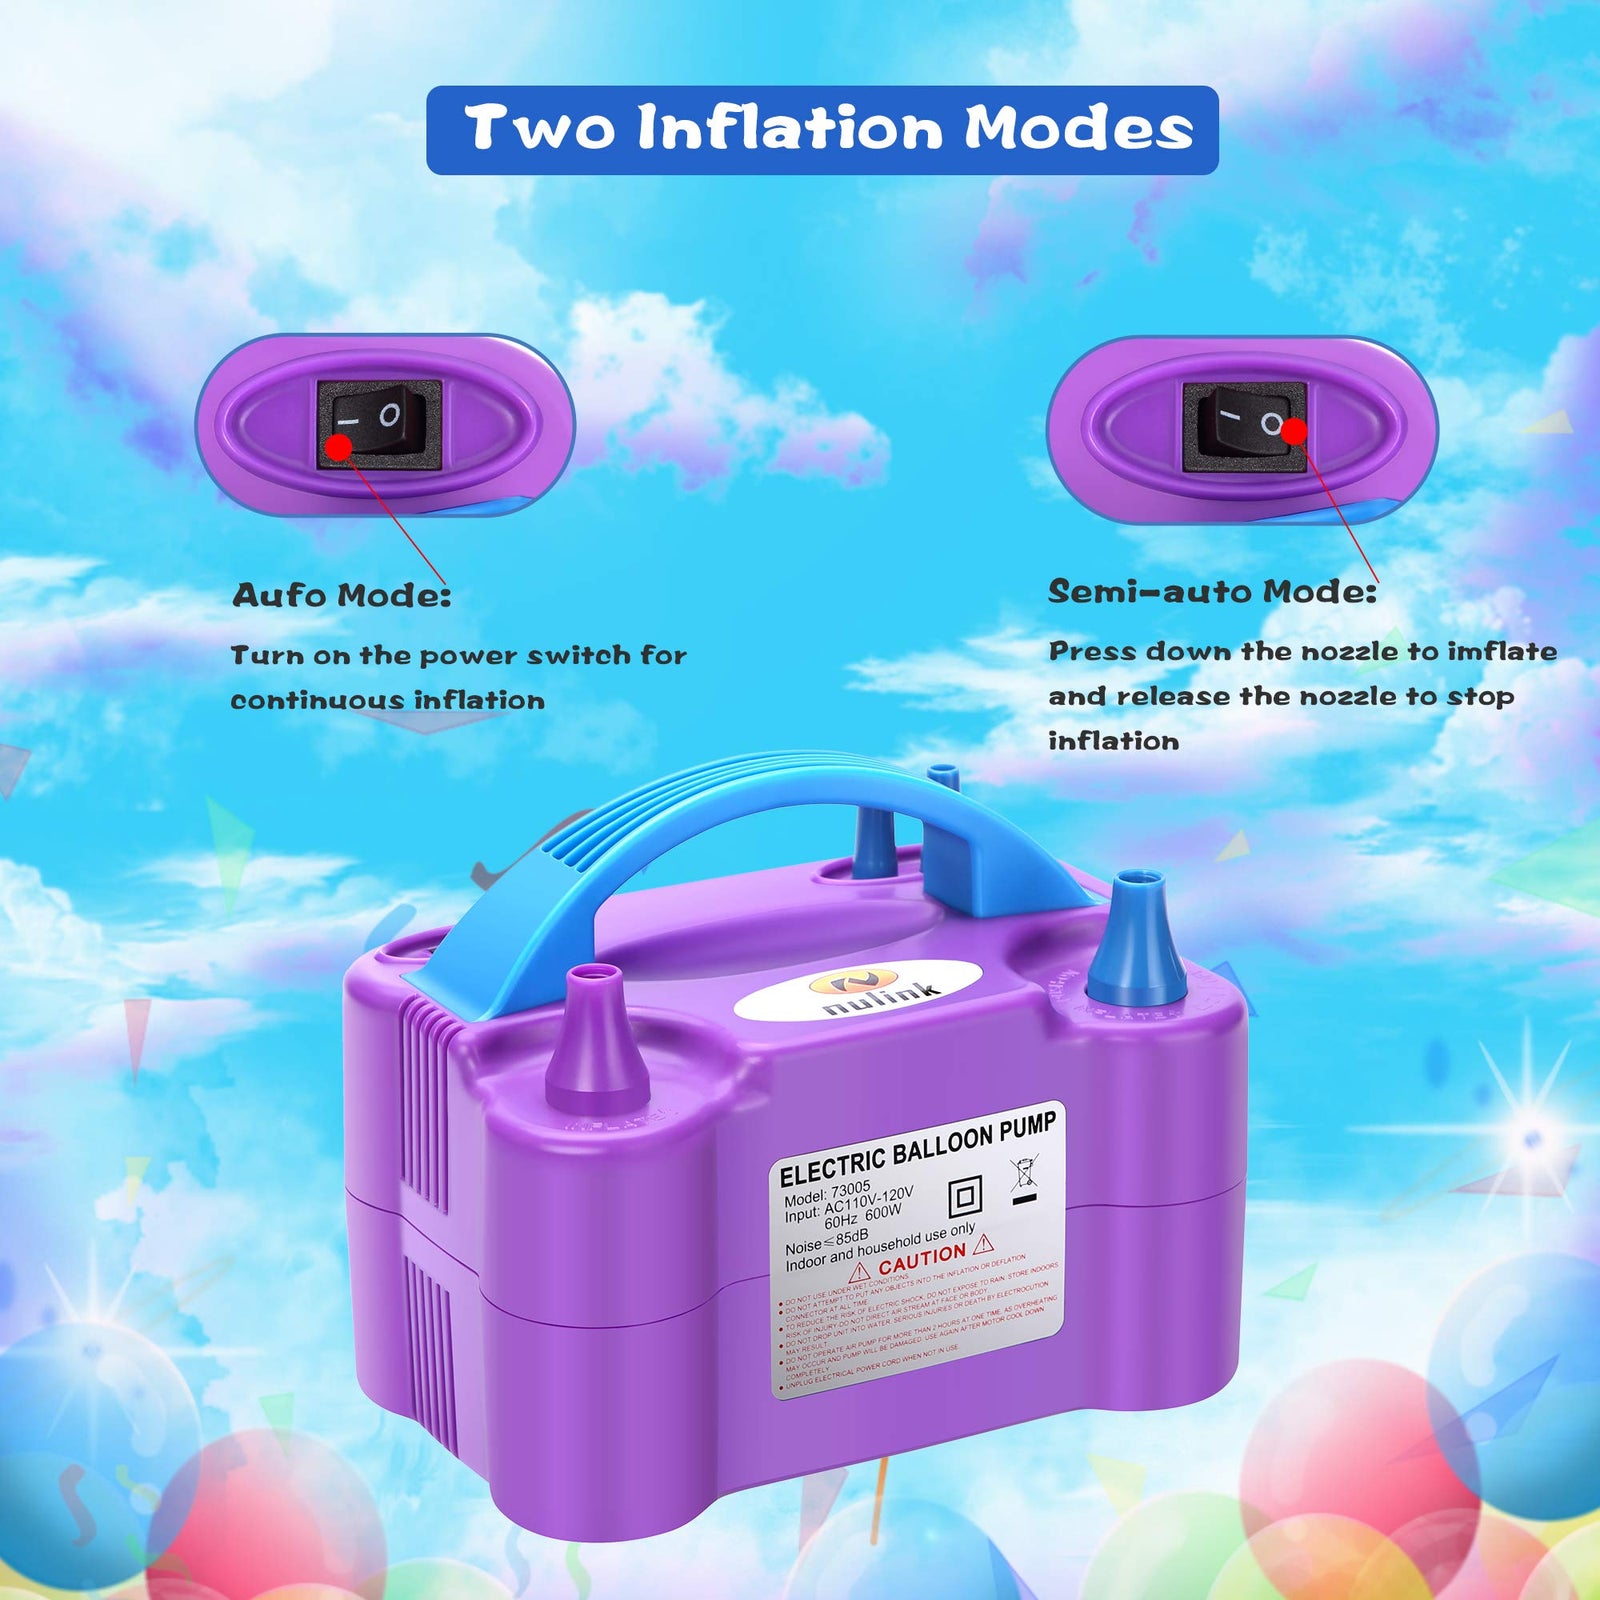 NuLink Electric Portable Dual Nozzle Balloon Blower Pump Inflation for Decoration, Party, Sport [110V~120V, 600W, Purple]